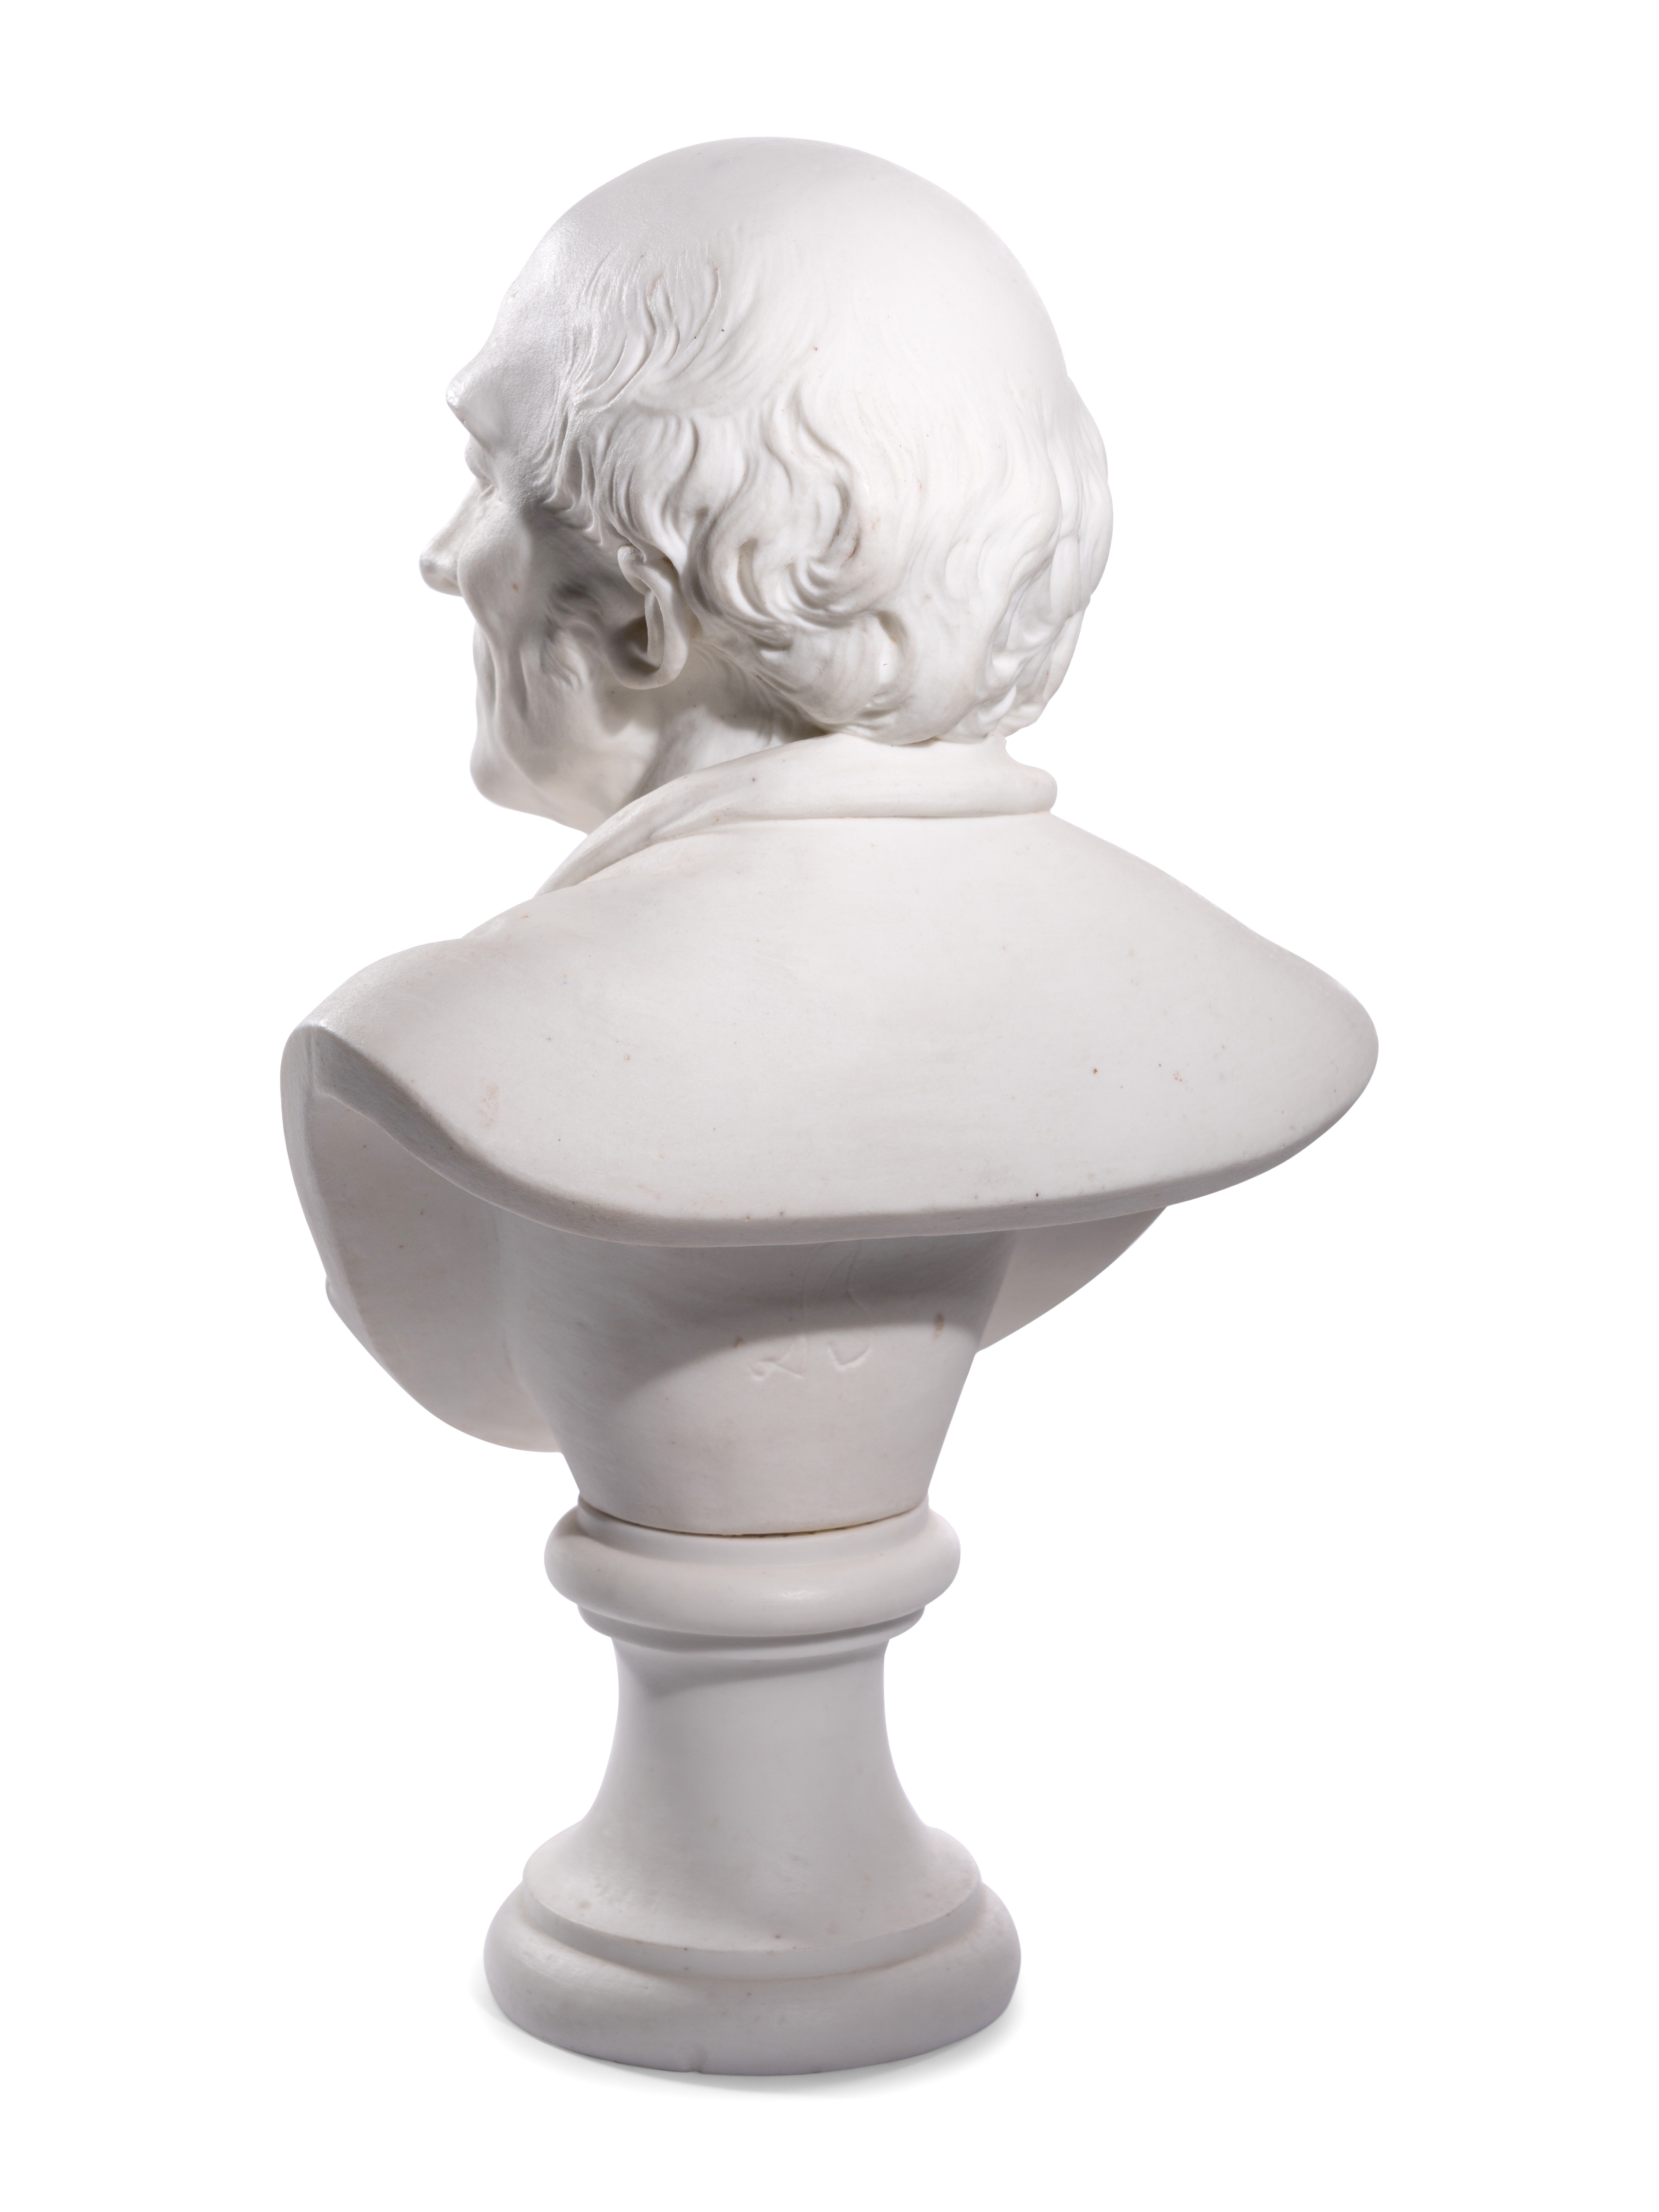 A French Biscuit Porcelain Bust of Fran'cois-Marie Arouet, Called Voltaire - Image 8 of 20